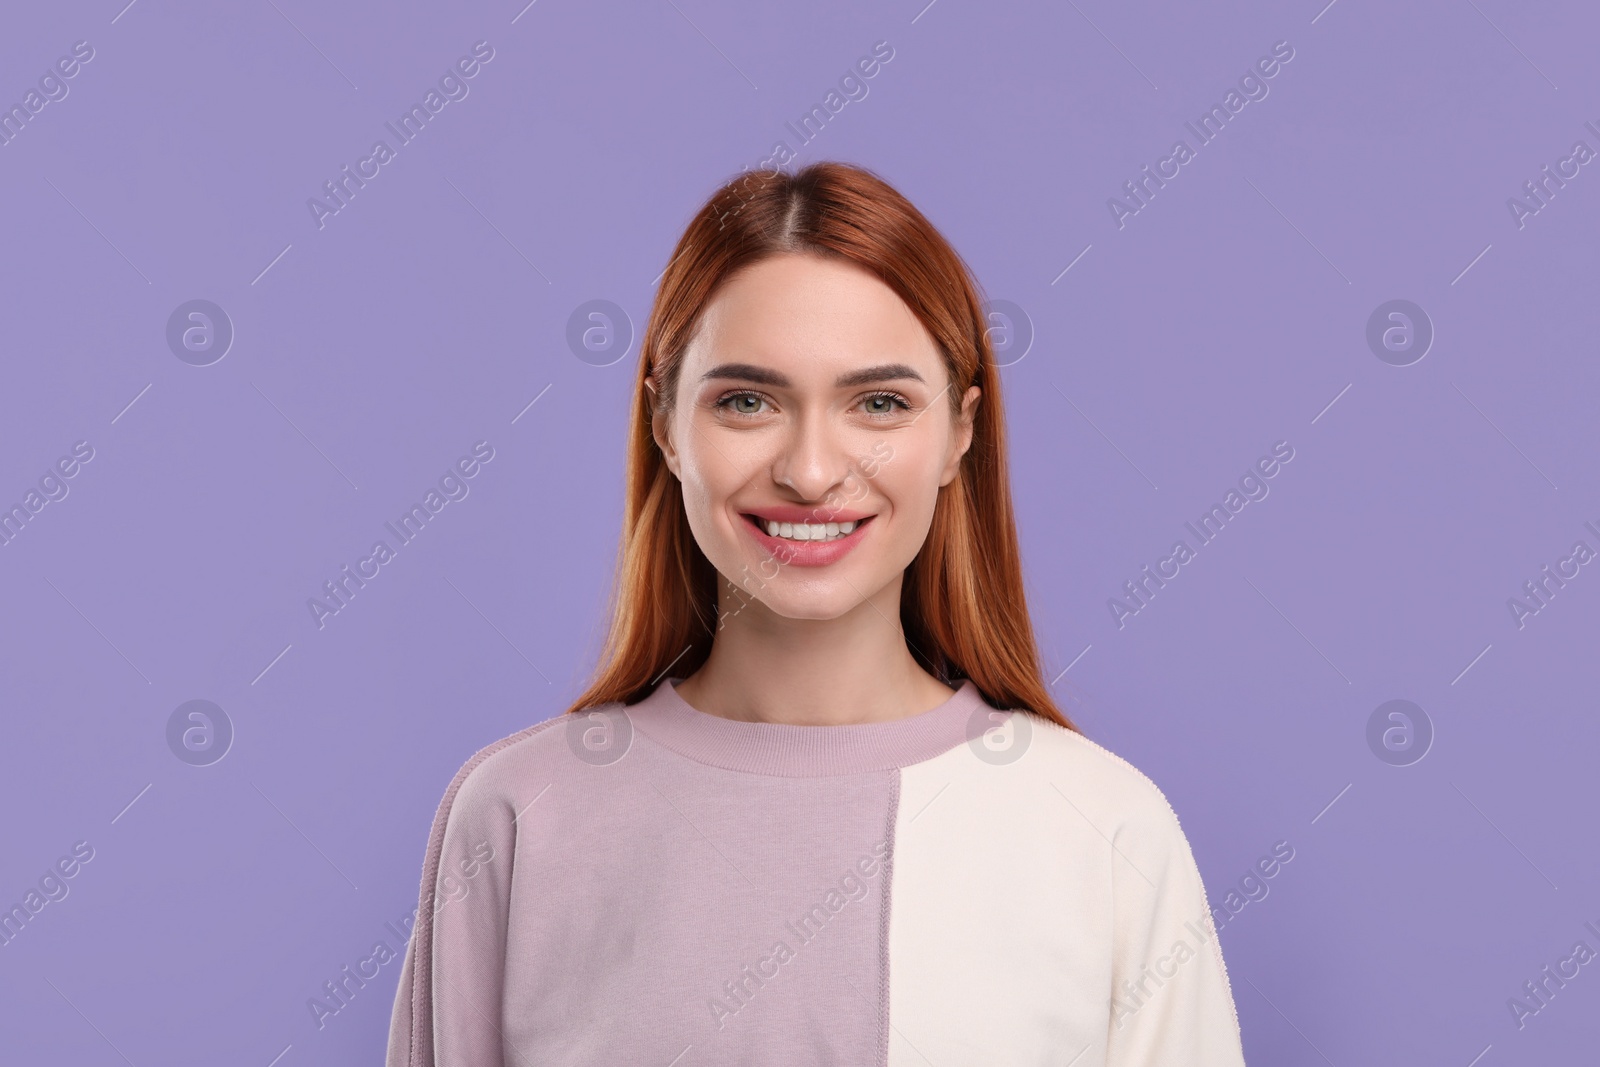 Photo of Beautiful woman with clean teeth smiling on violet background